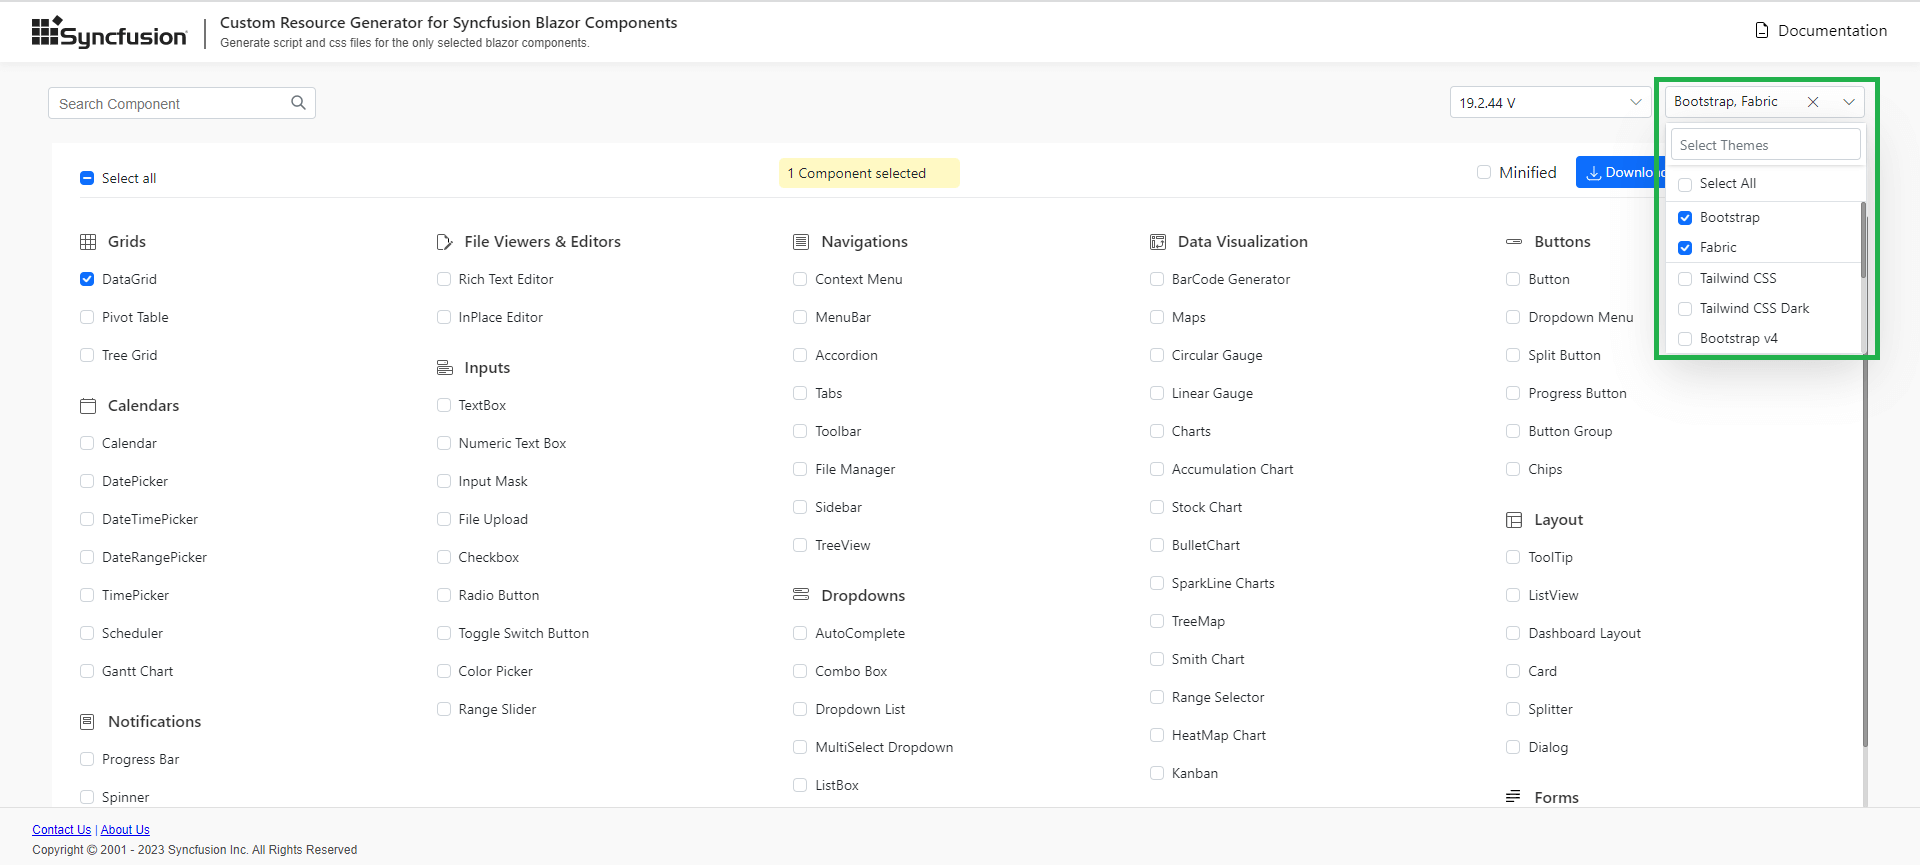 Select the built-in themes